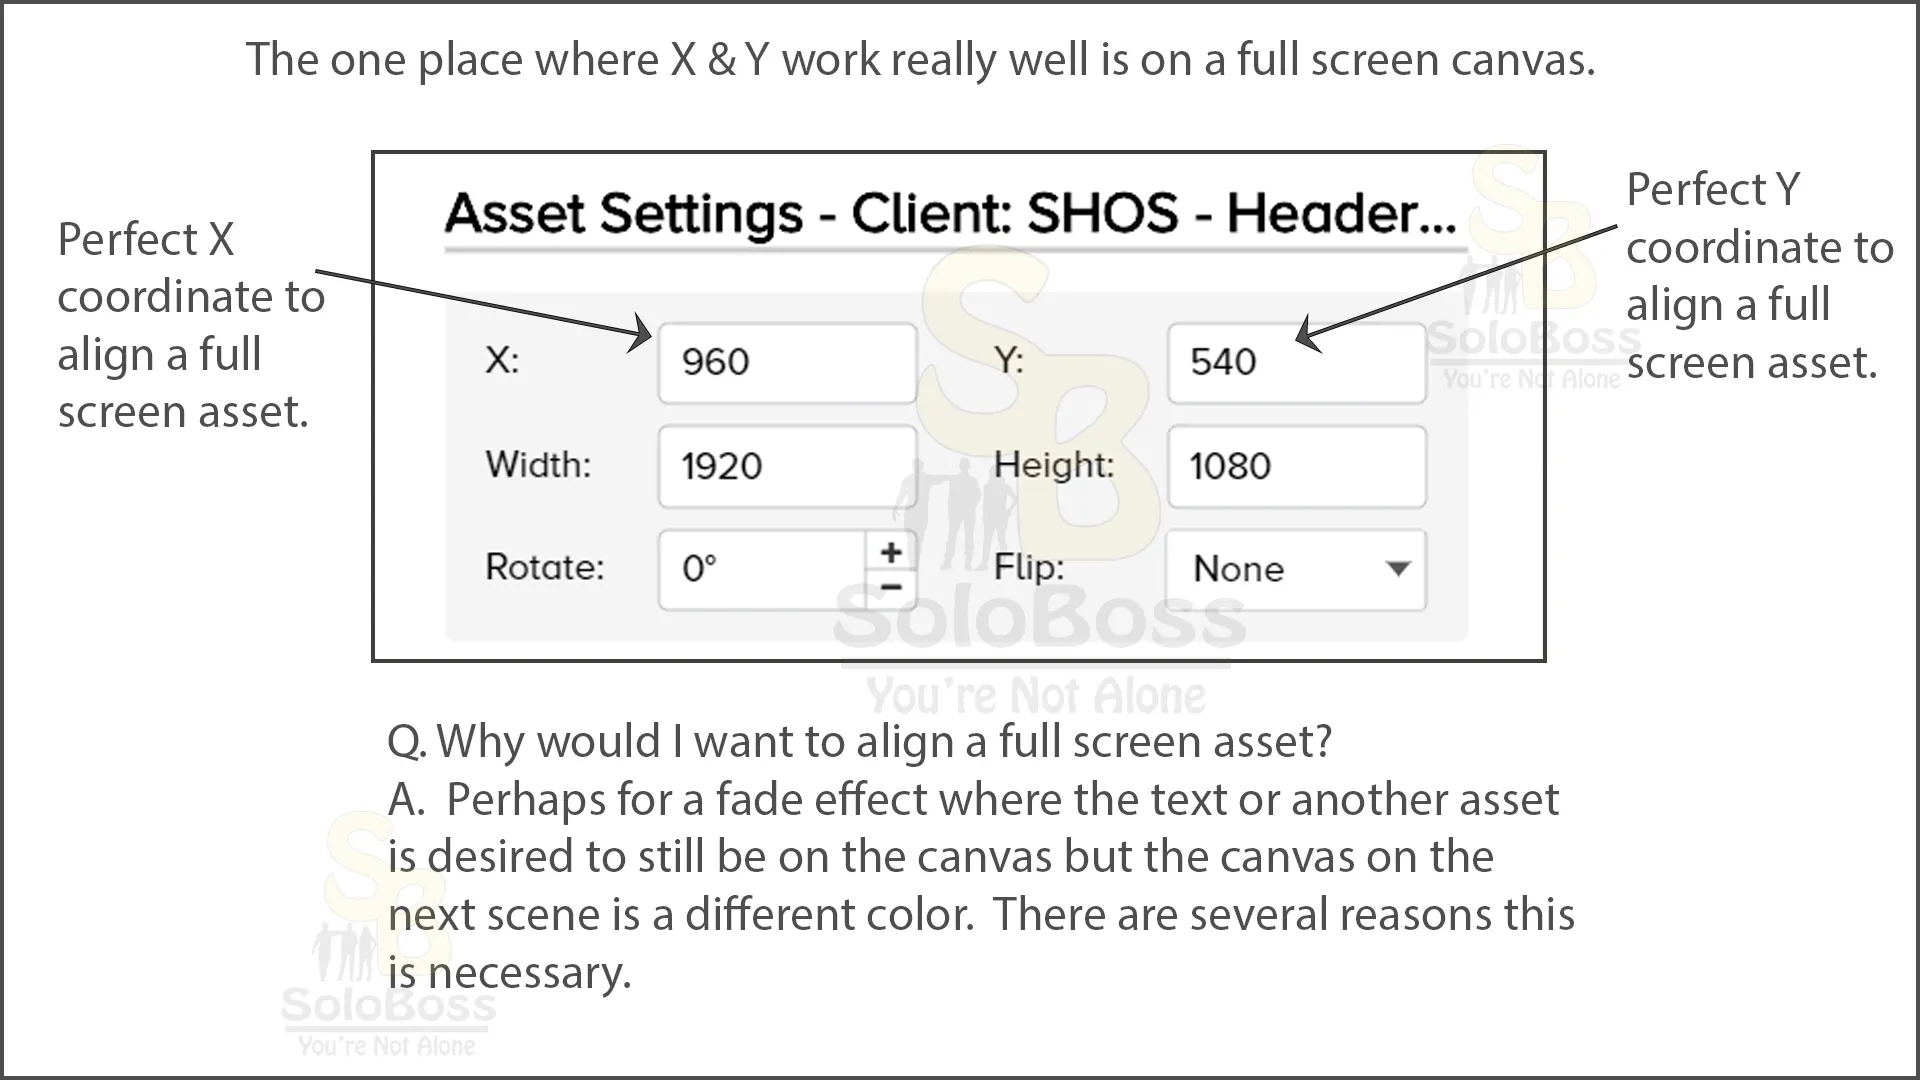 Provides settings for the X and Y coordinates to be aligned to a full screen.